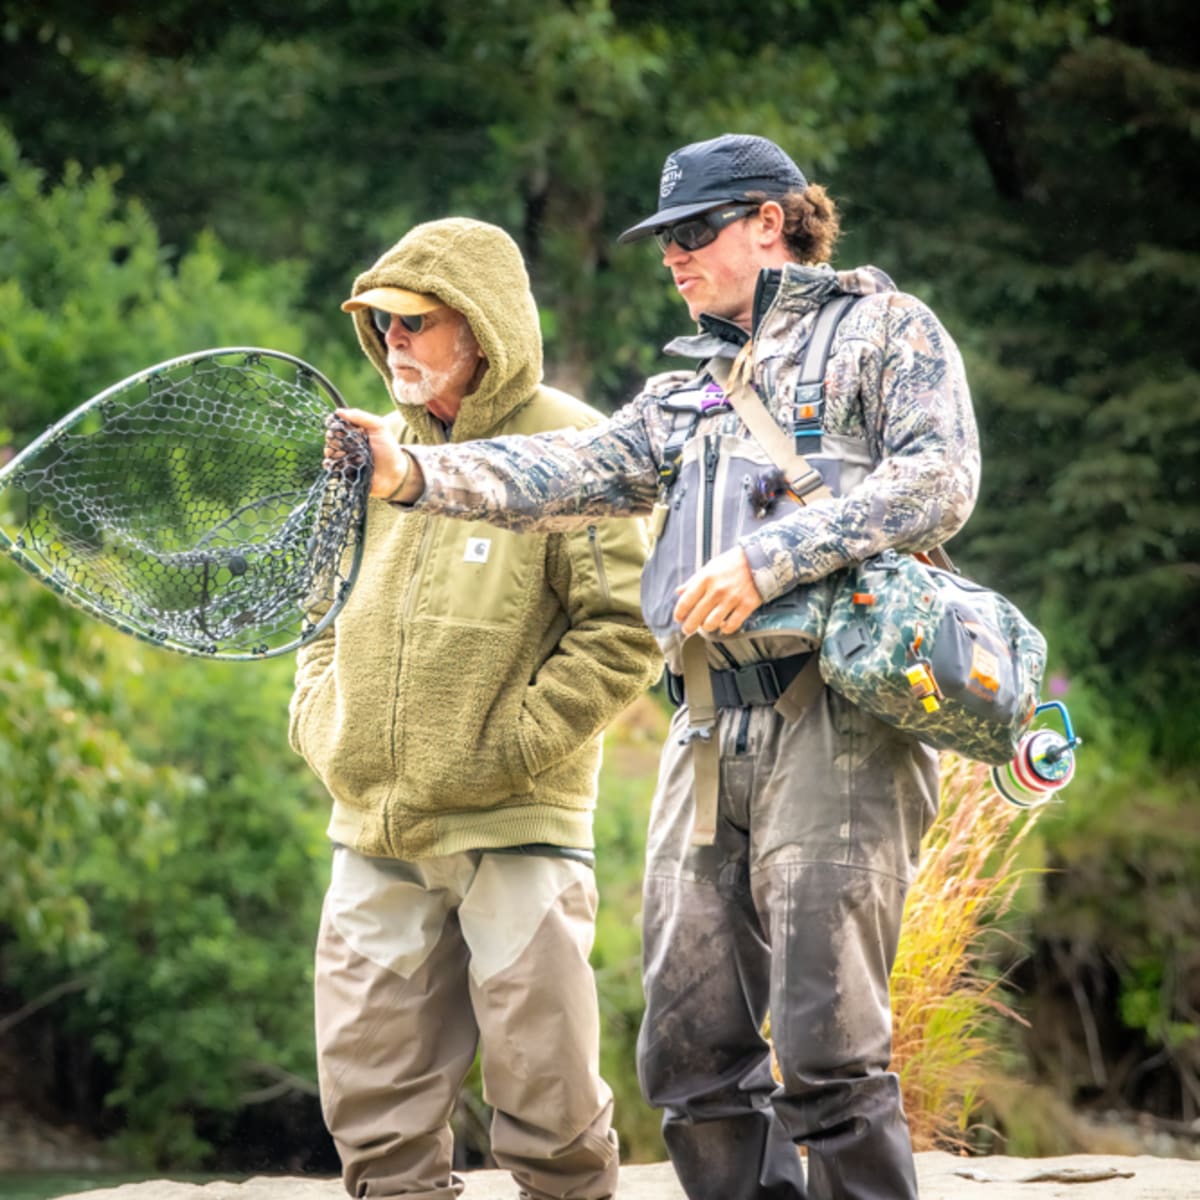 A must have skill for more fly fishing success - Men's Journal